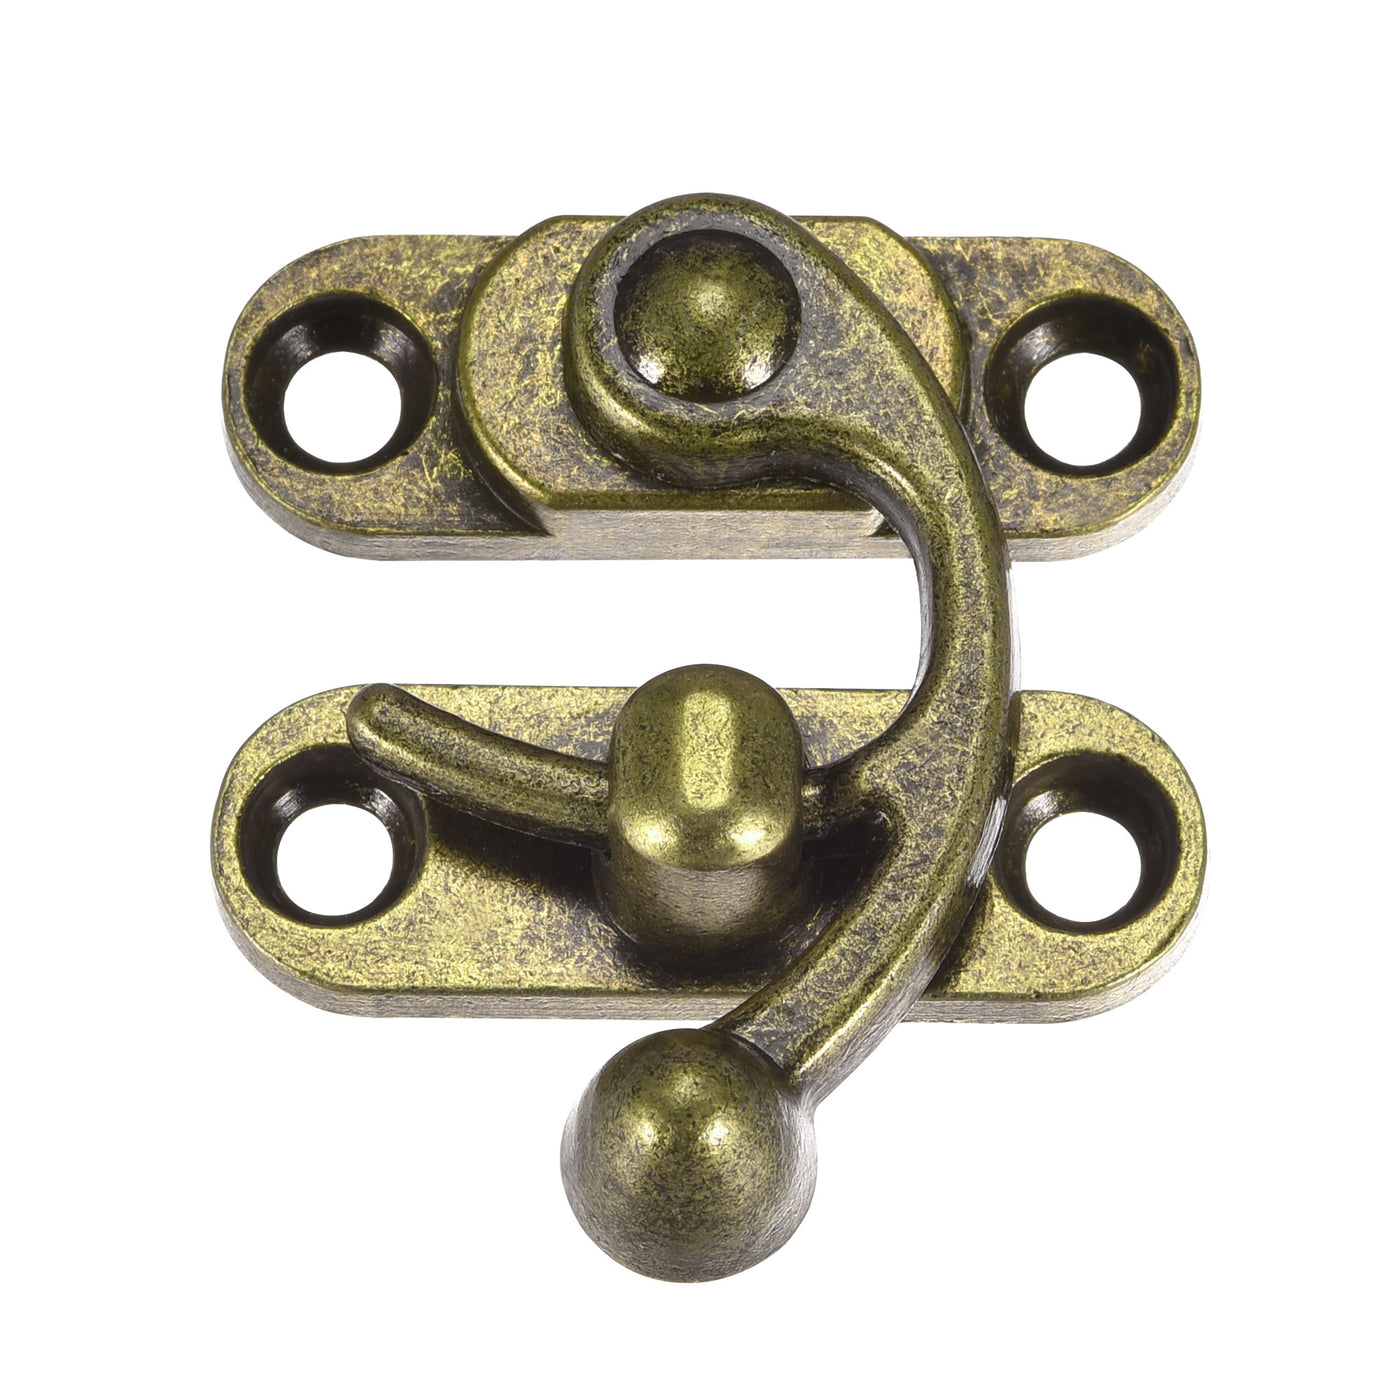 uxcell Uxcell Antique Vintage Lock Clasp Right Latch Hook Hasp 45mmx39mm Swing Arm Latch Bronze Tone 4 Pcs